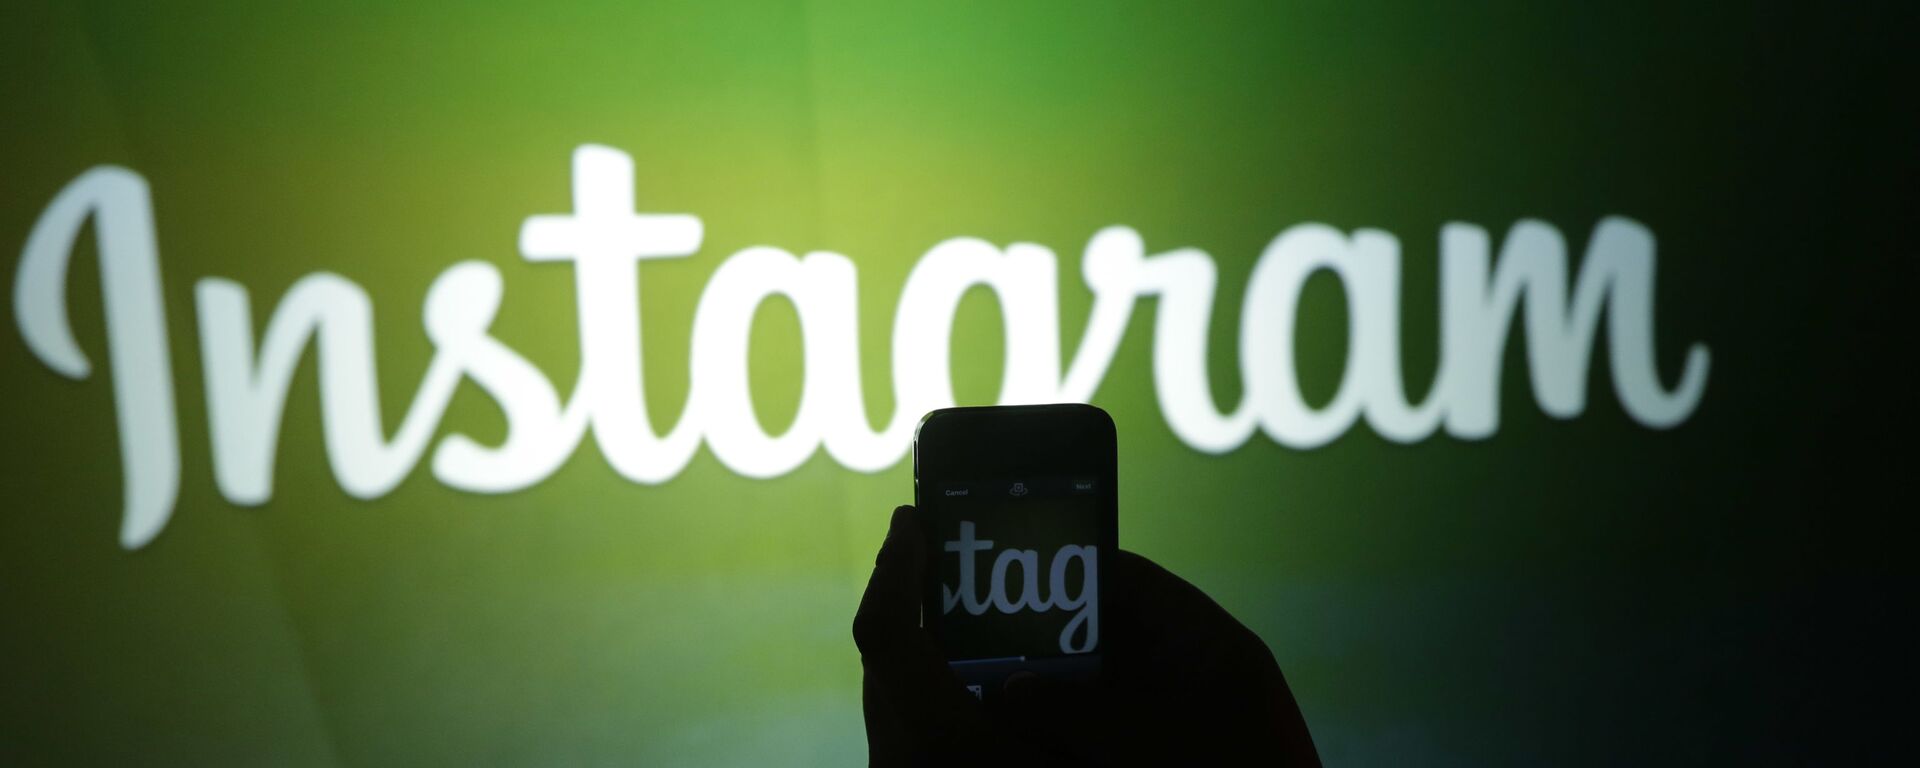 A journalist makes a video of the Instagram logo using the new video feature at Facebook headquarters in Menlo Park, Calif., Thursday, June 20, 2013 - Sputnik International, 1920, 27.09.2021